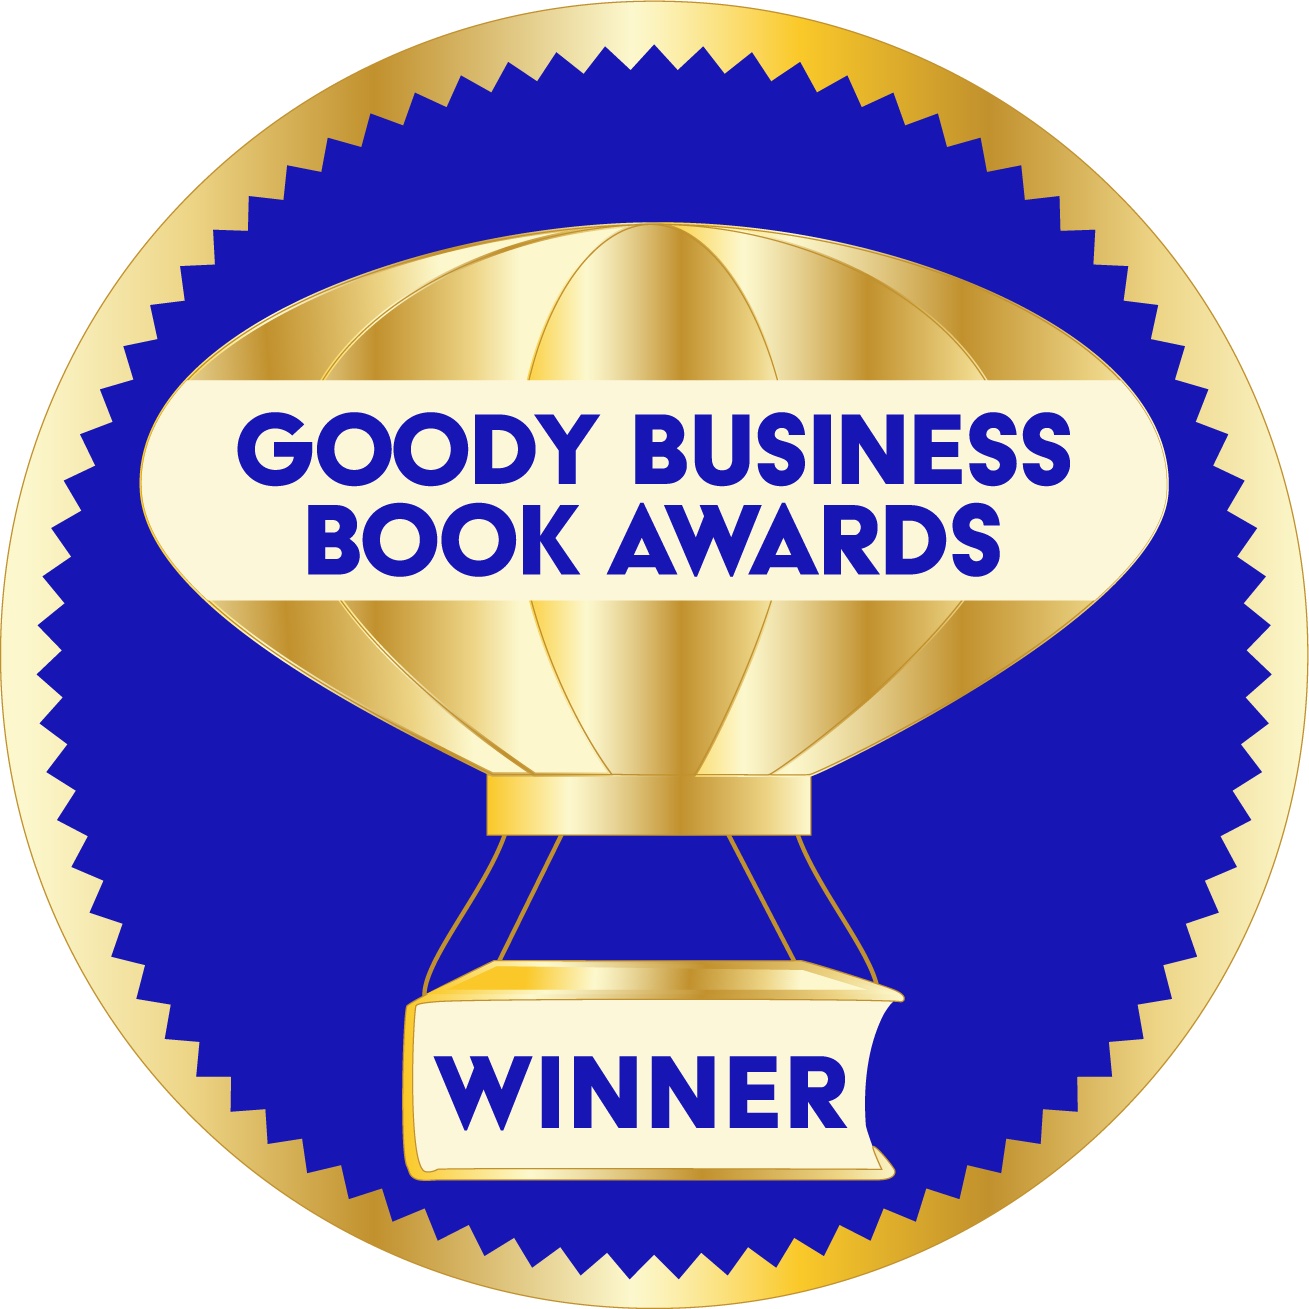 The Annual Goody Business Book Awards is humbly honored to be recognized in Write Business Results’ Top 8 Business Book Awards for 2023, for their “societal impact” awards for authors".